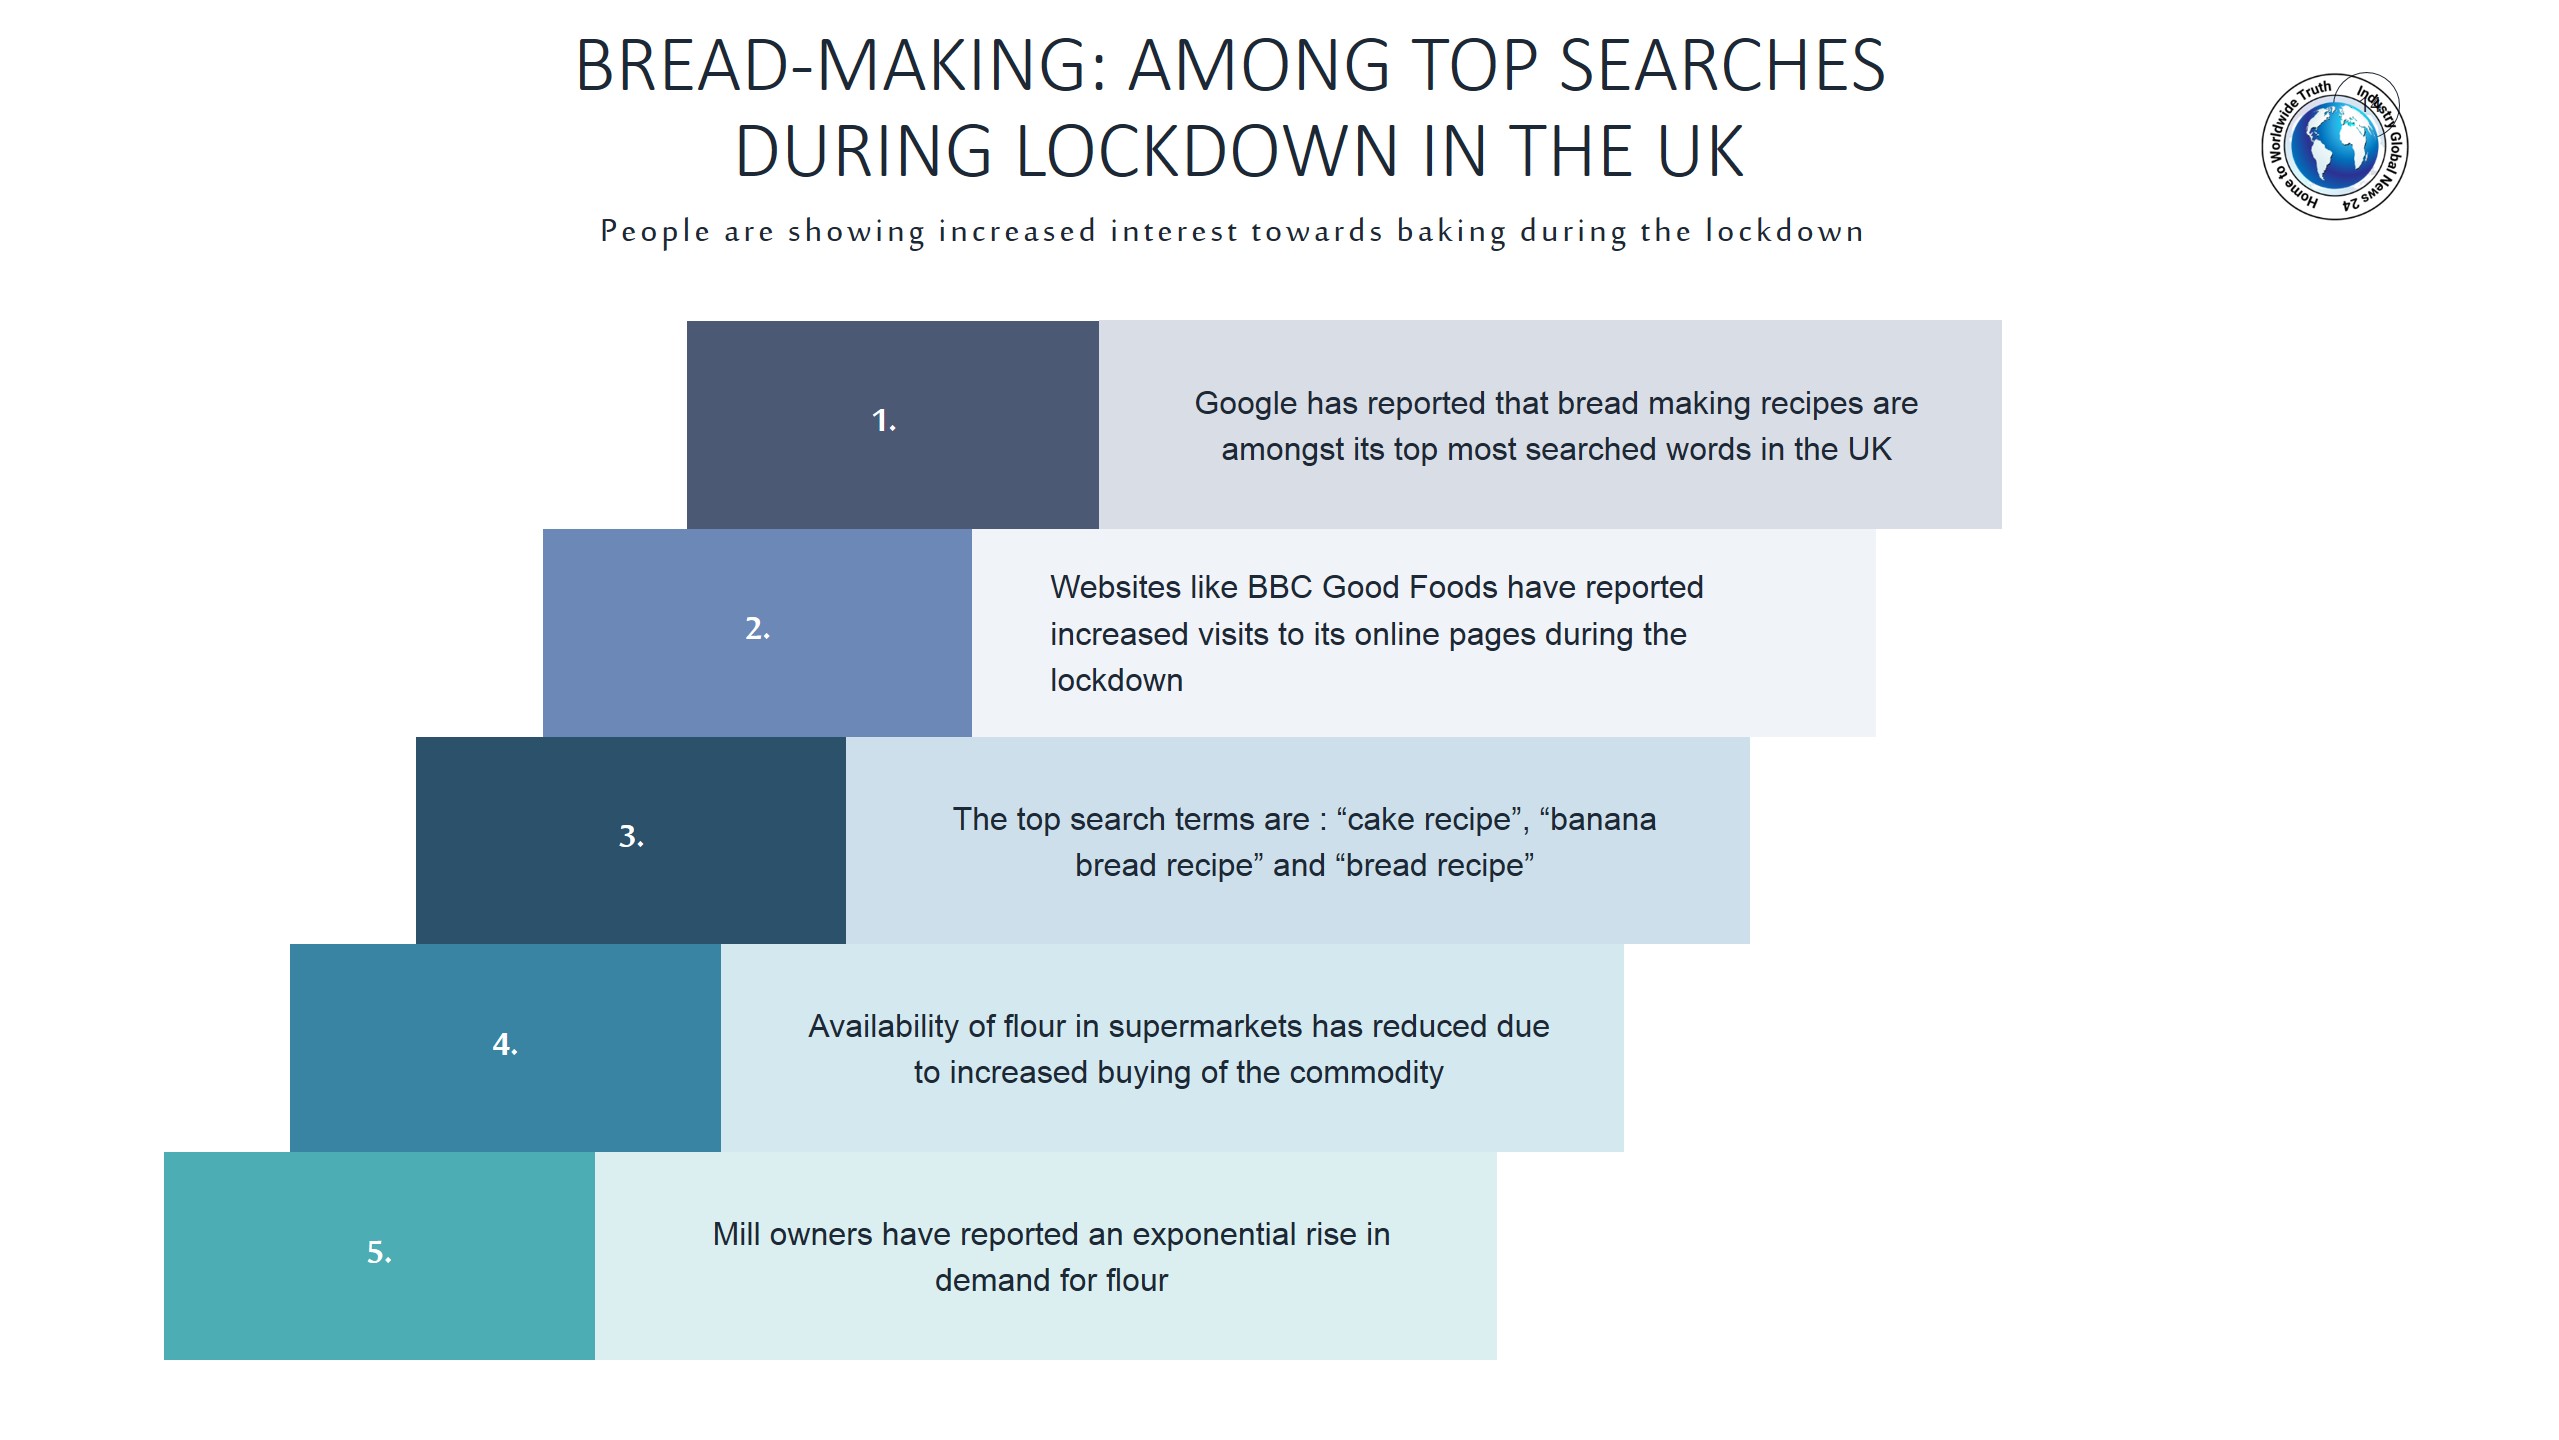 Bread-making among top searches during lockdown in the UK